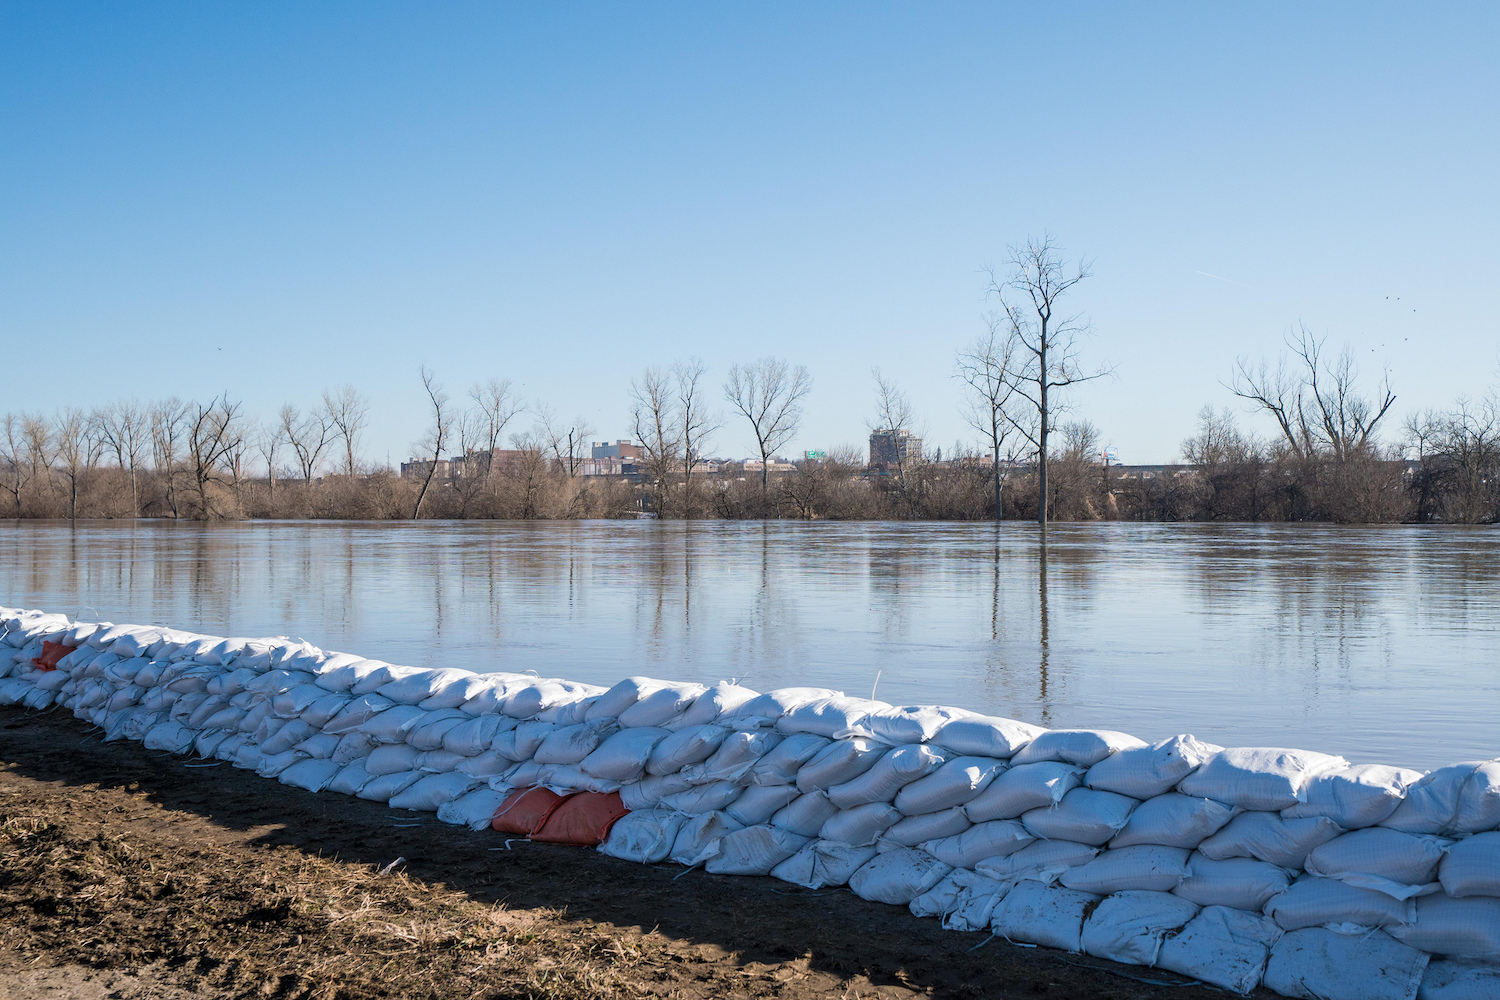 Midwest flooding creates food safety concerns—here's how to prevent contamination. Credit: 139th Airlift Wing / Flickr, March 2019